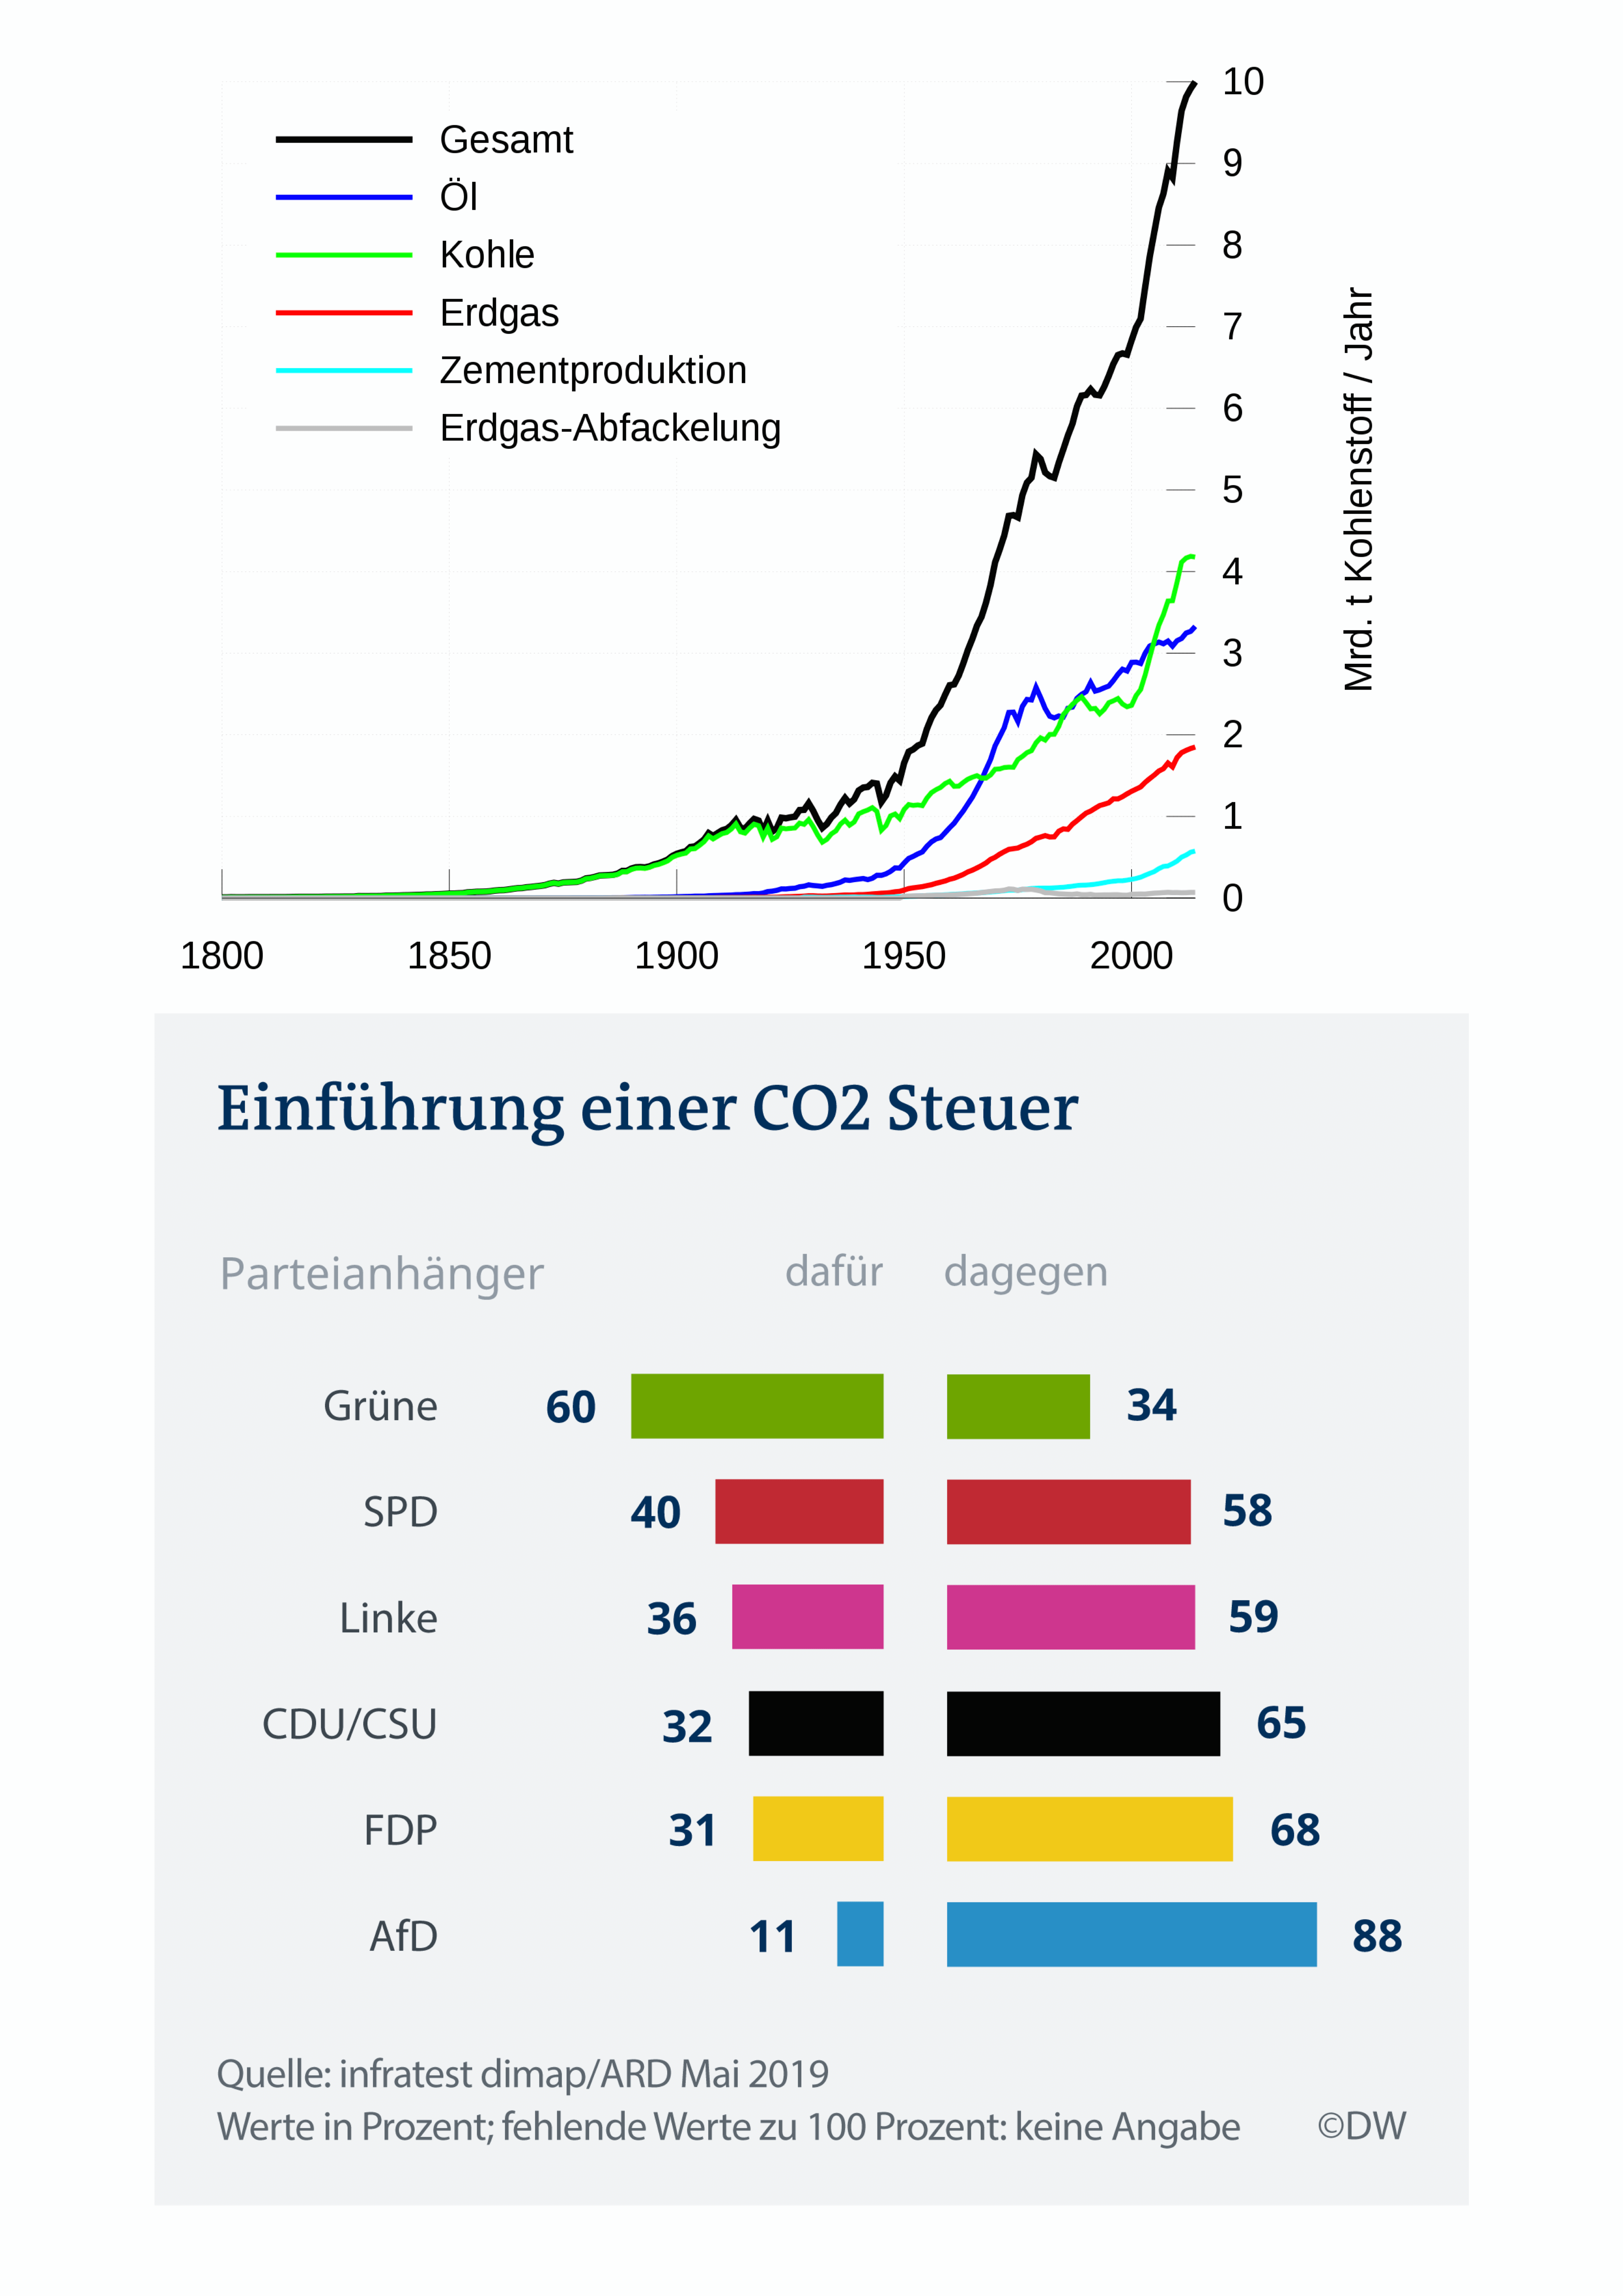 Co2Steuer